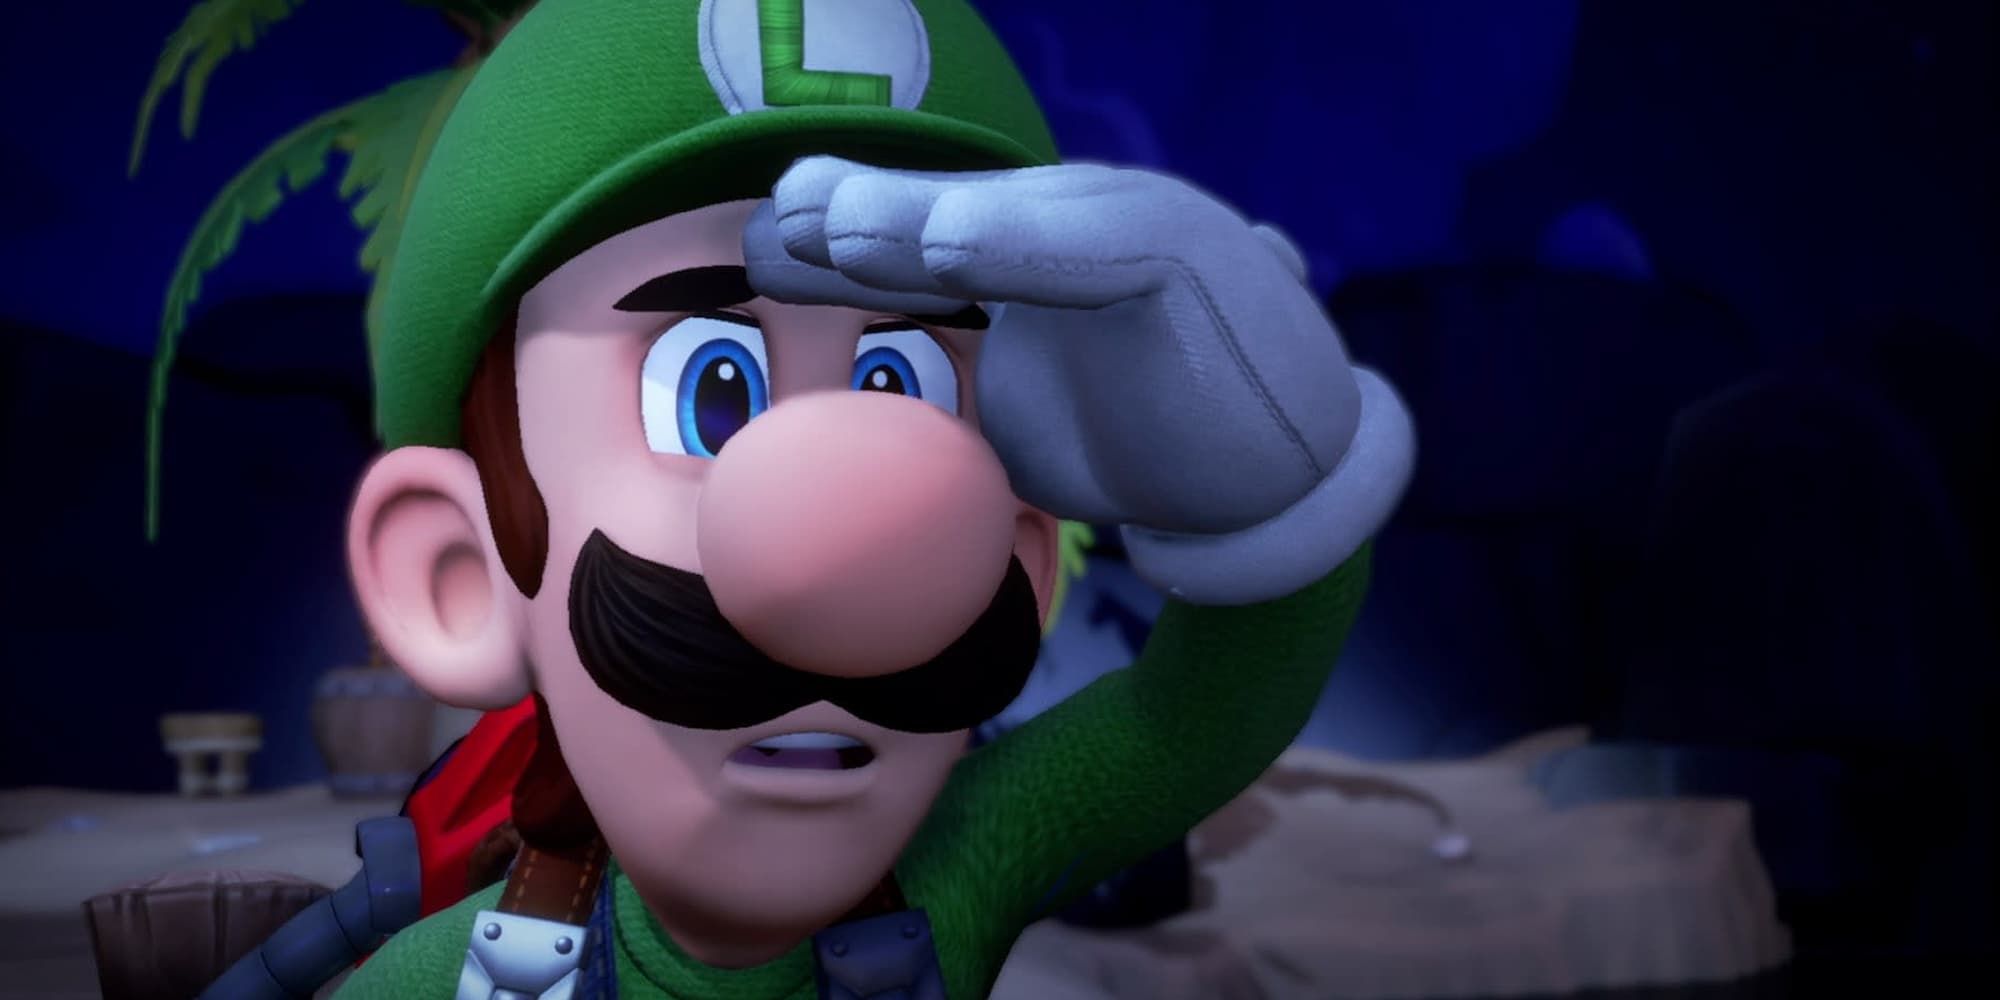 Luigi holds his hand at his brow to block light as he looks forward in Luigi's Mansion.